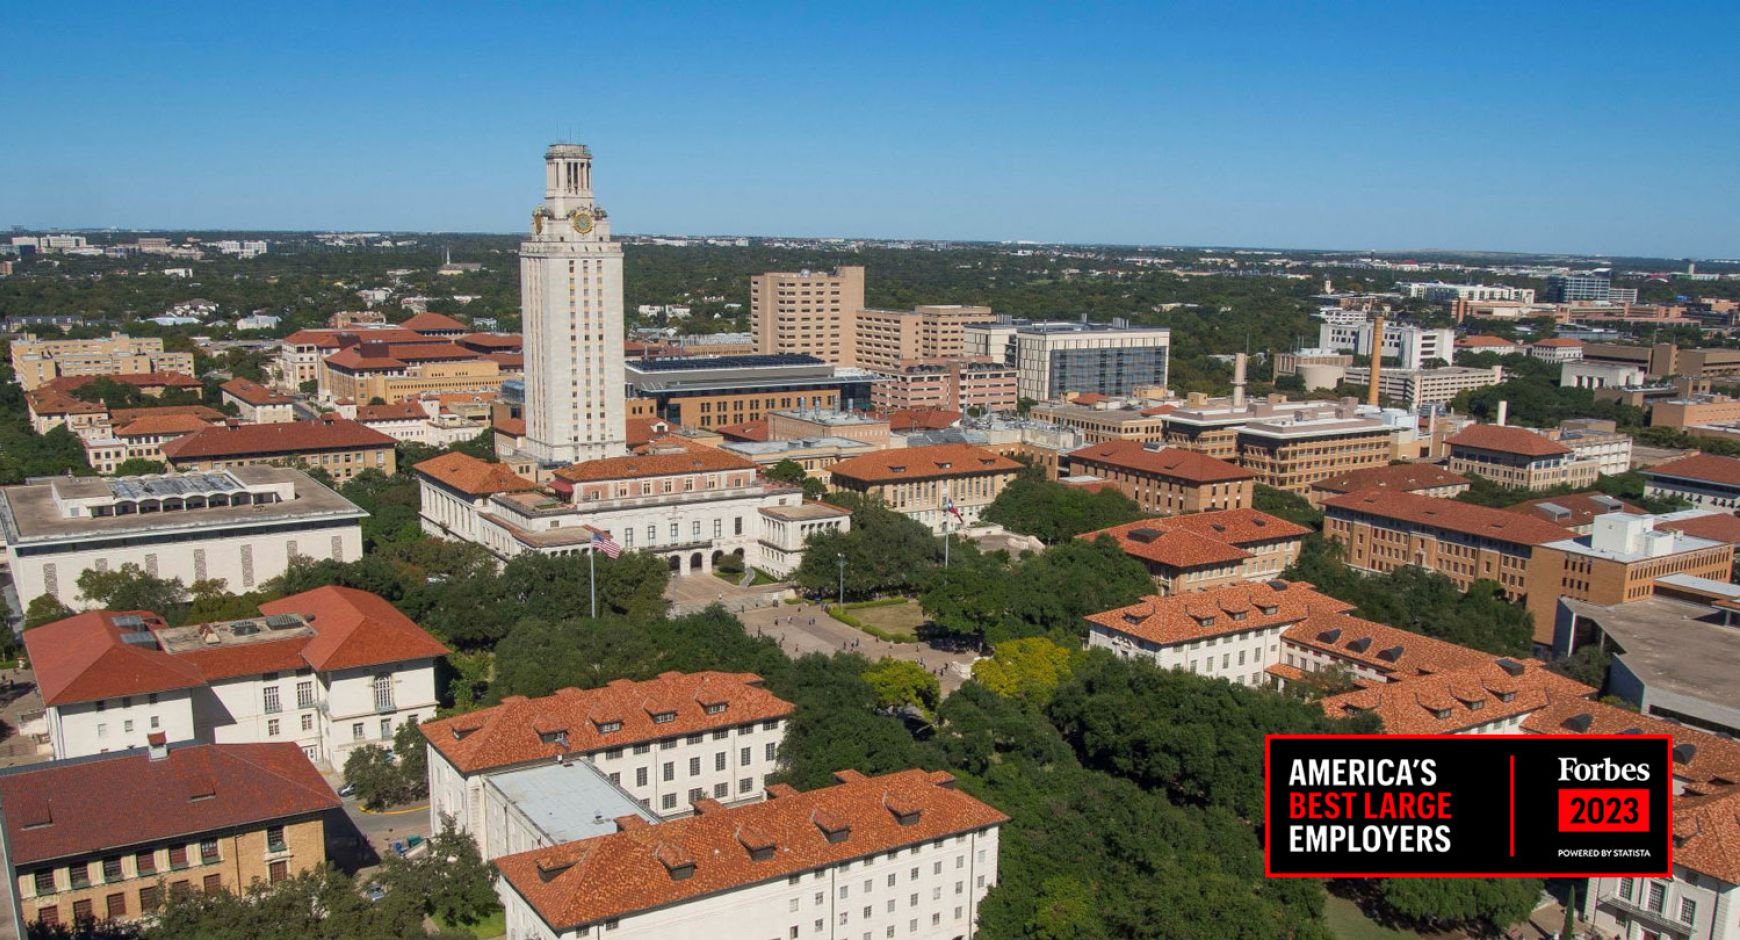 UT Main Campus aerial image with Forbes Best Large Employers designation